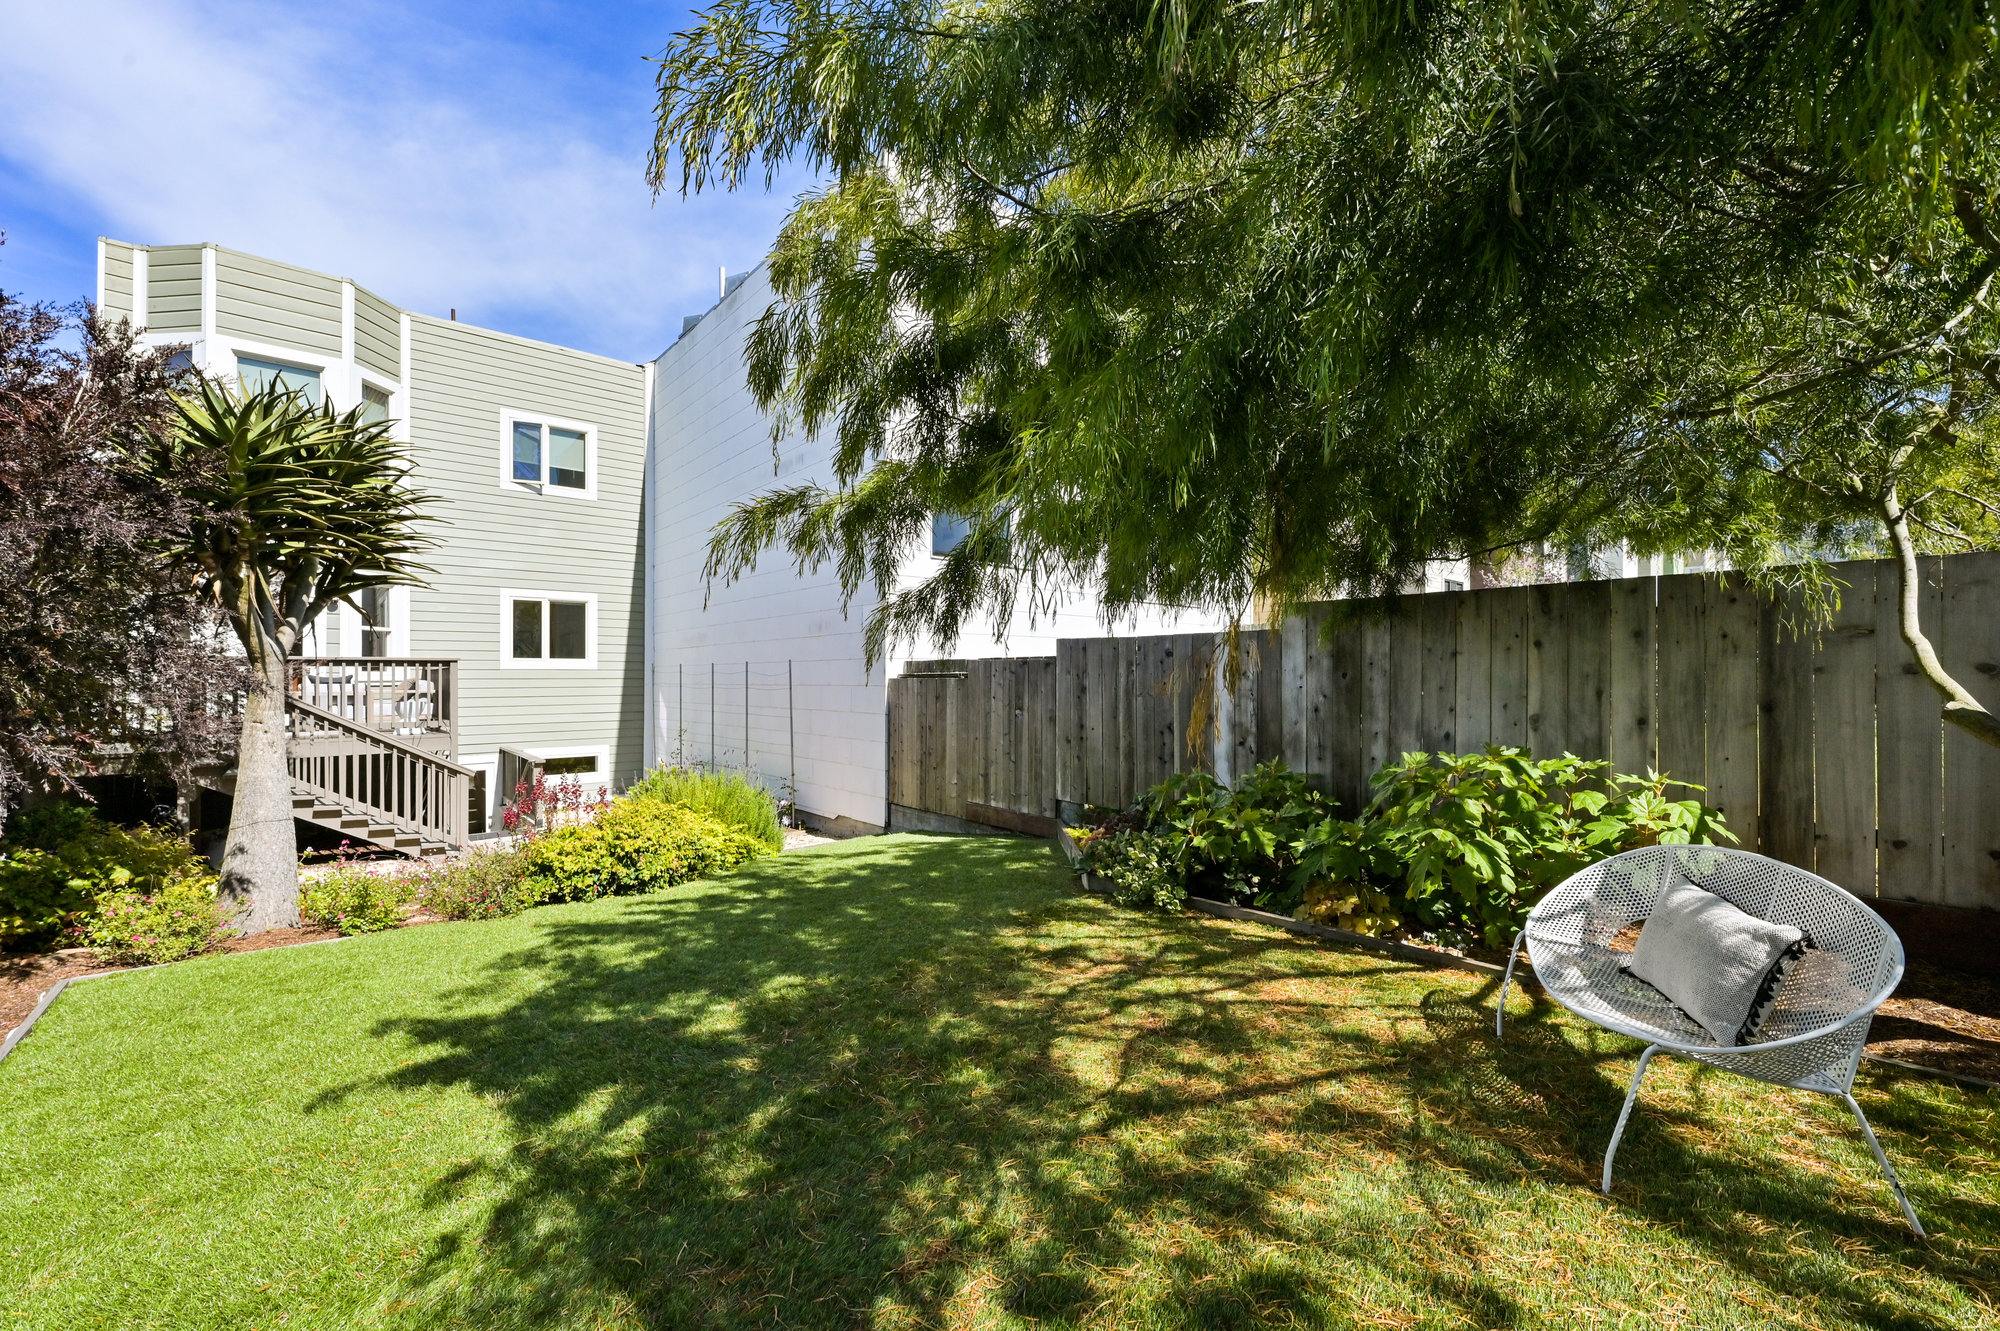 Property Photo: View from the rear yard, showing the exterior facade of 719 18th Avenue